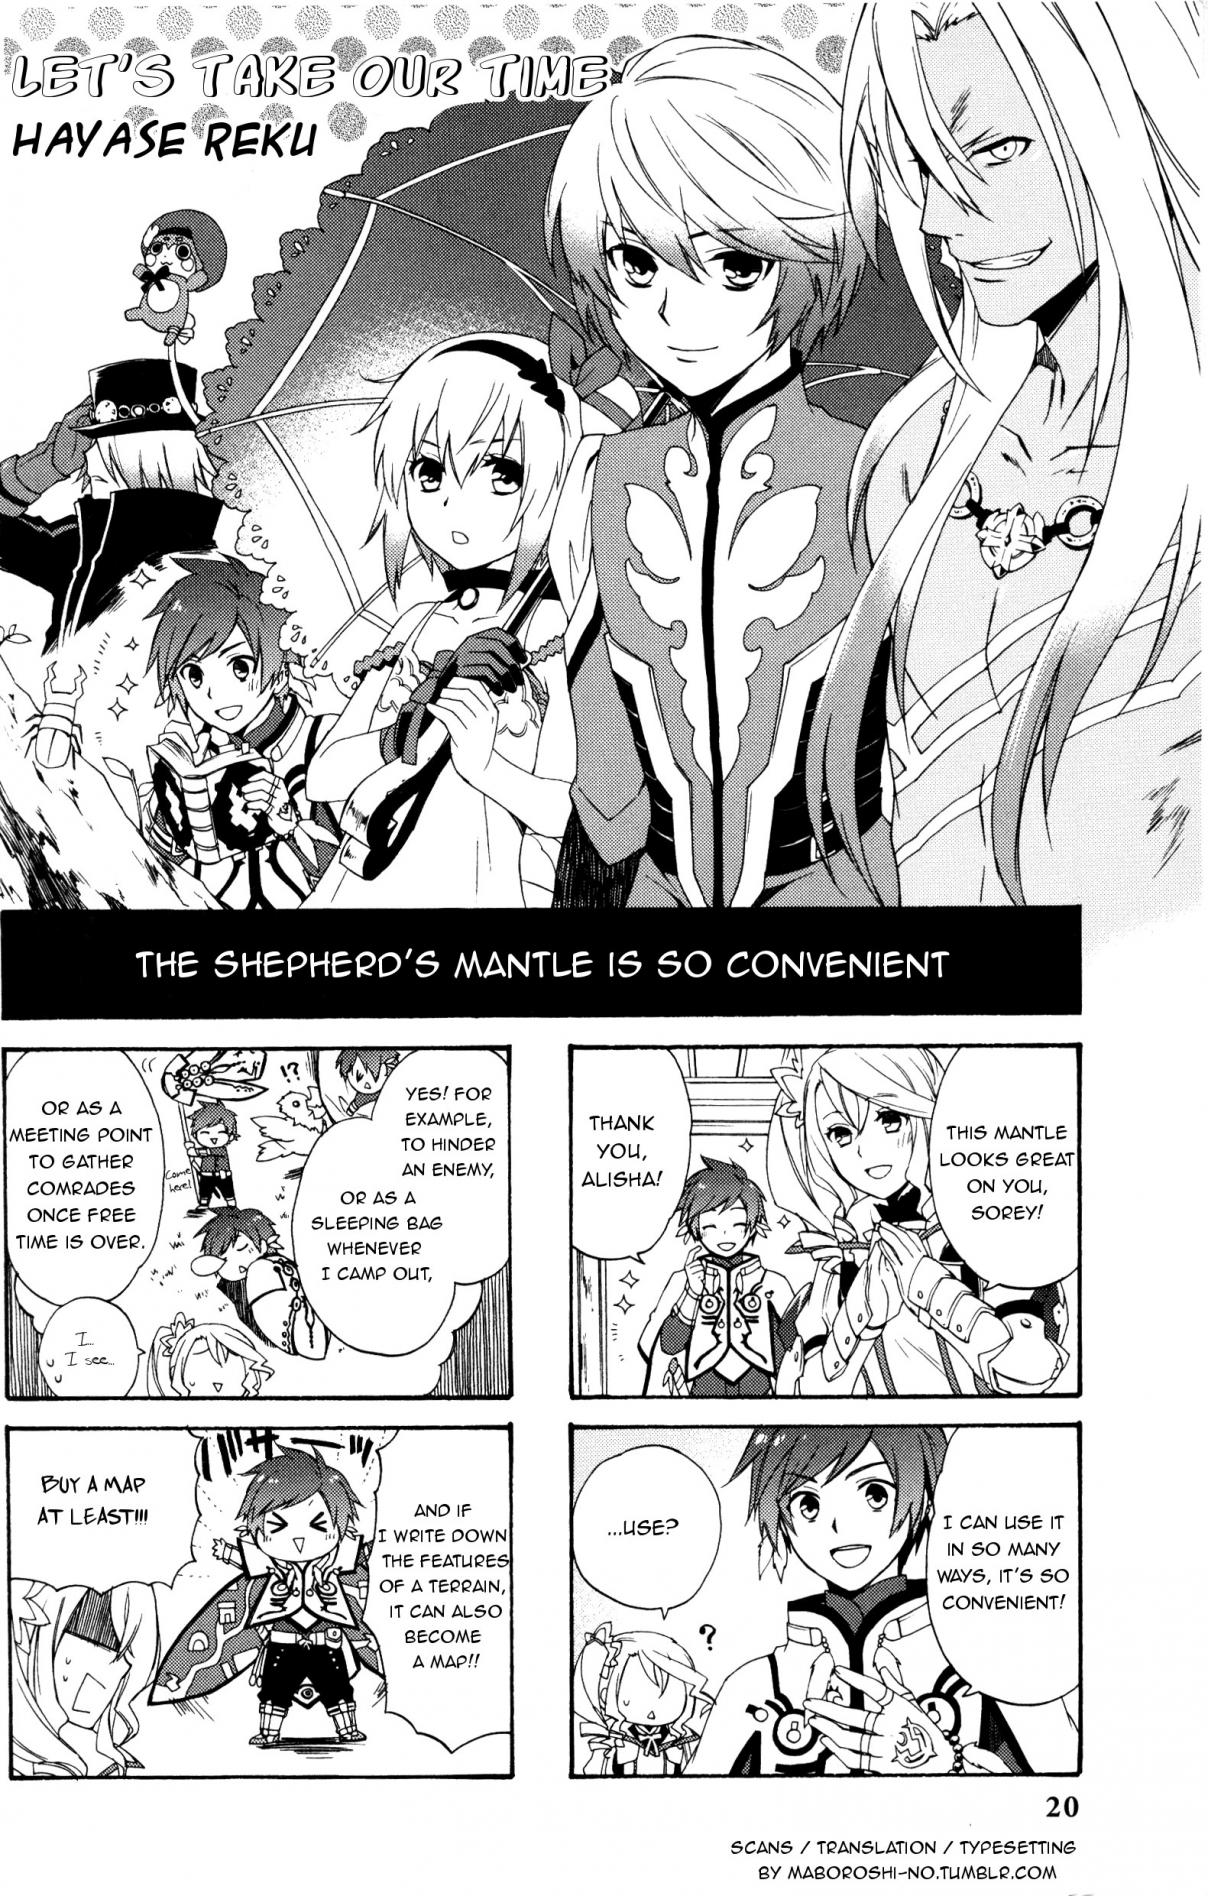 Tales of Zestiria 4koma Kings Ch. 3 Let's take our time.